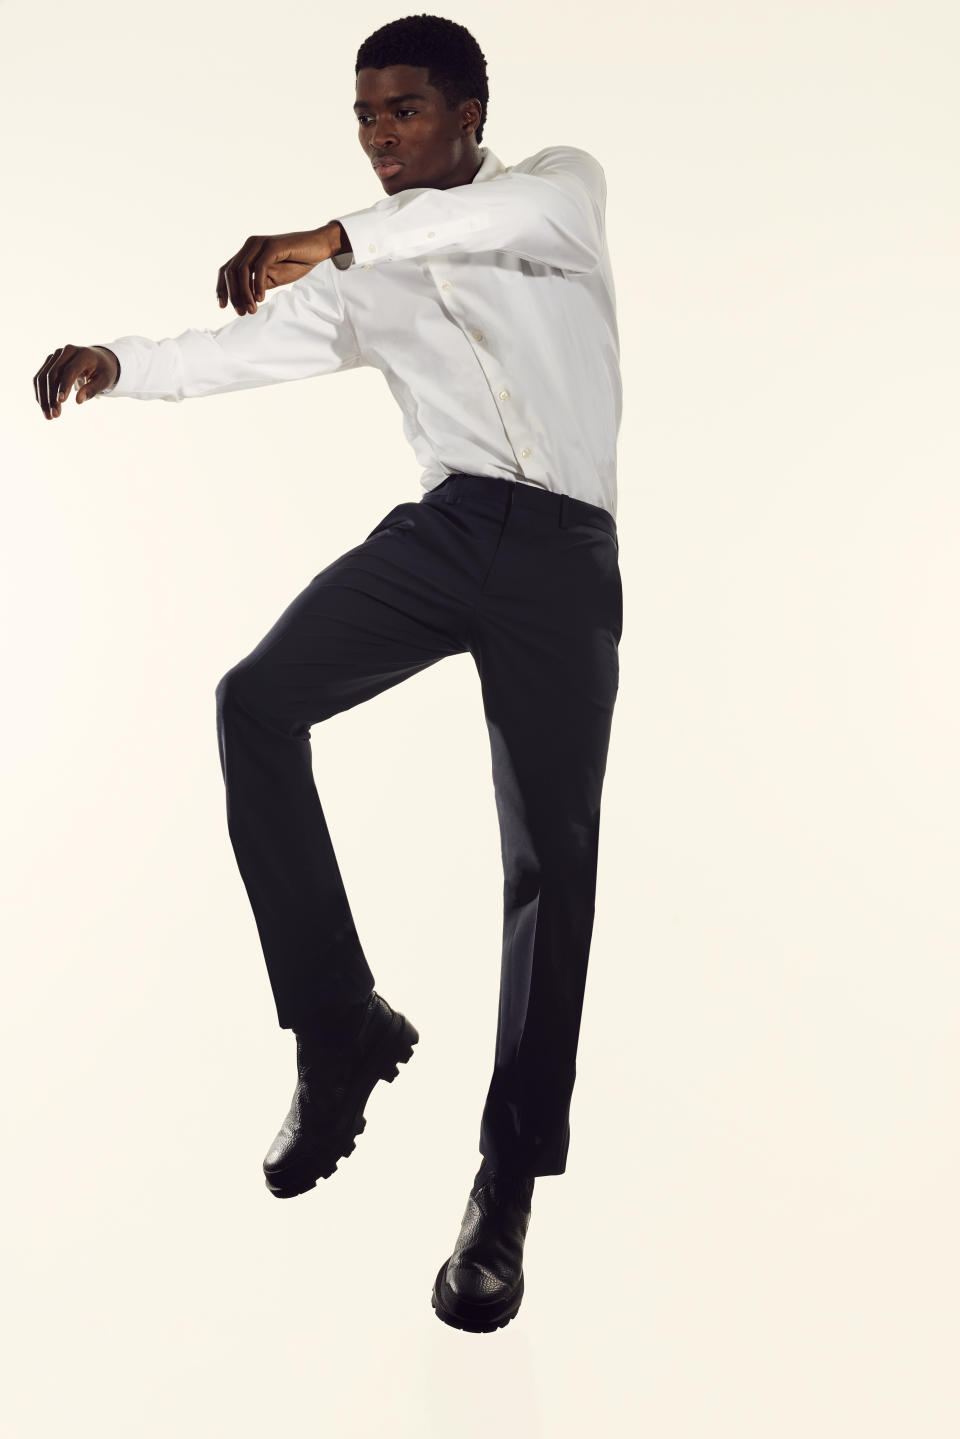 Alton Mason in the new Theory pant campaign.